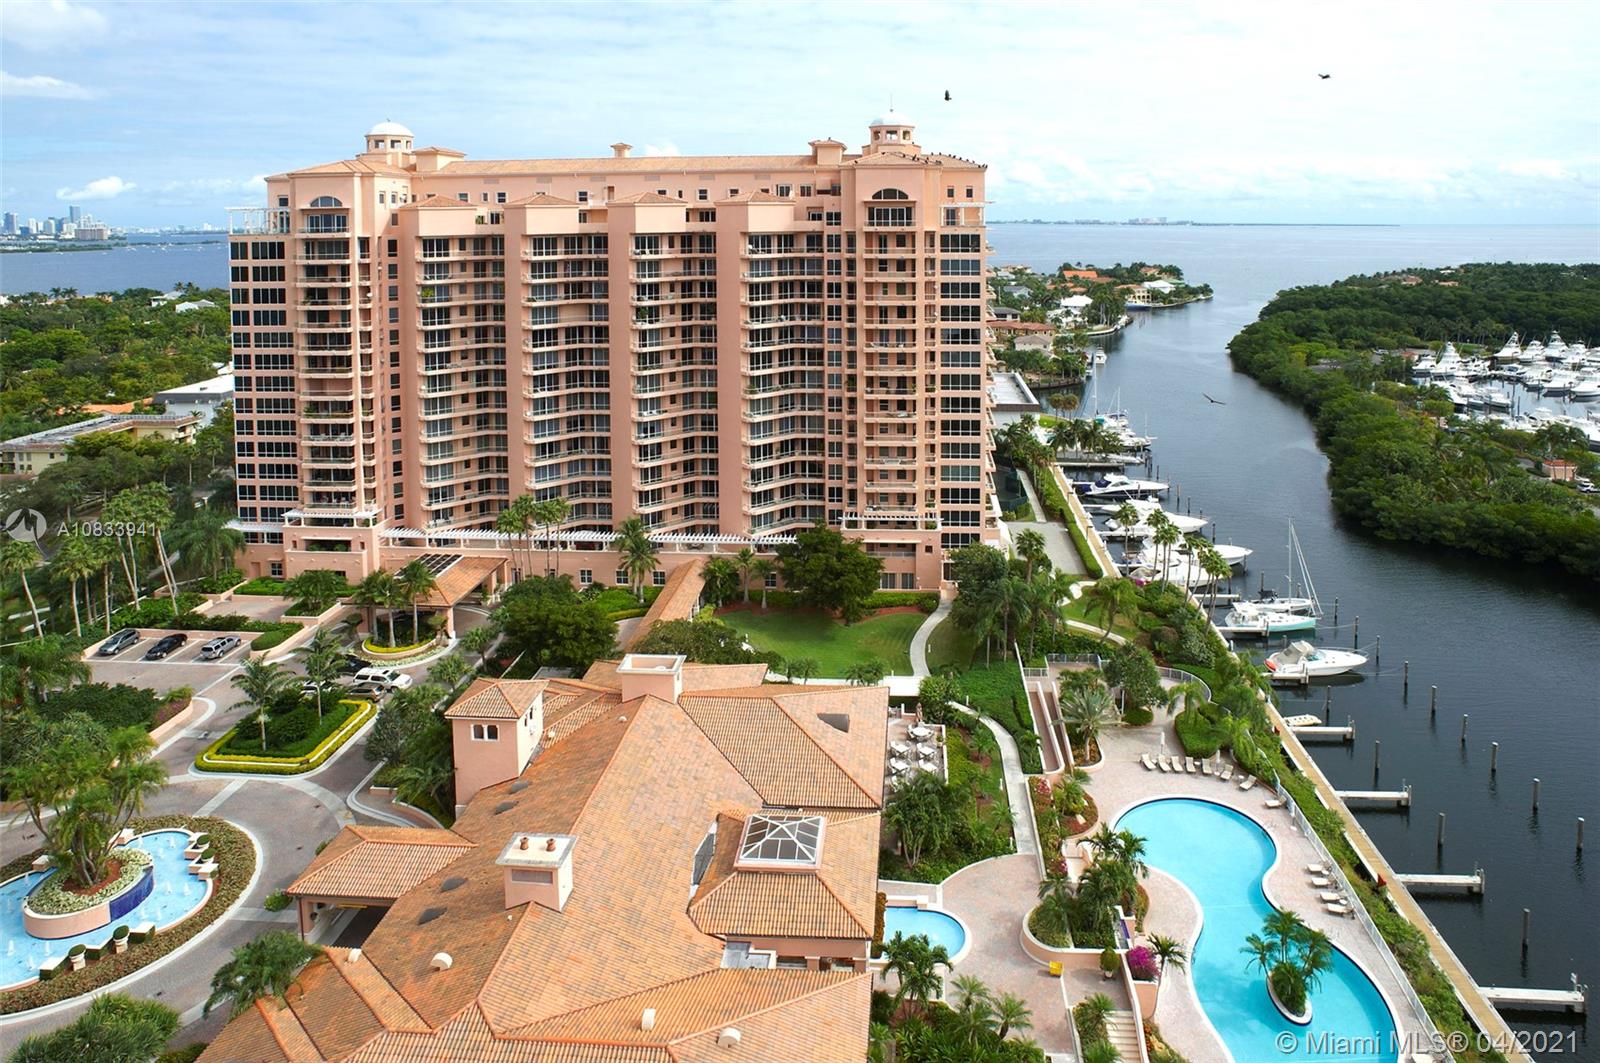 Gables Club I Apt 4A/3A Closed Sale in Coral Gables, FL - Presented by Mark  Zilbert on  - MLS A10833941